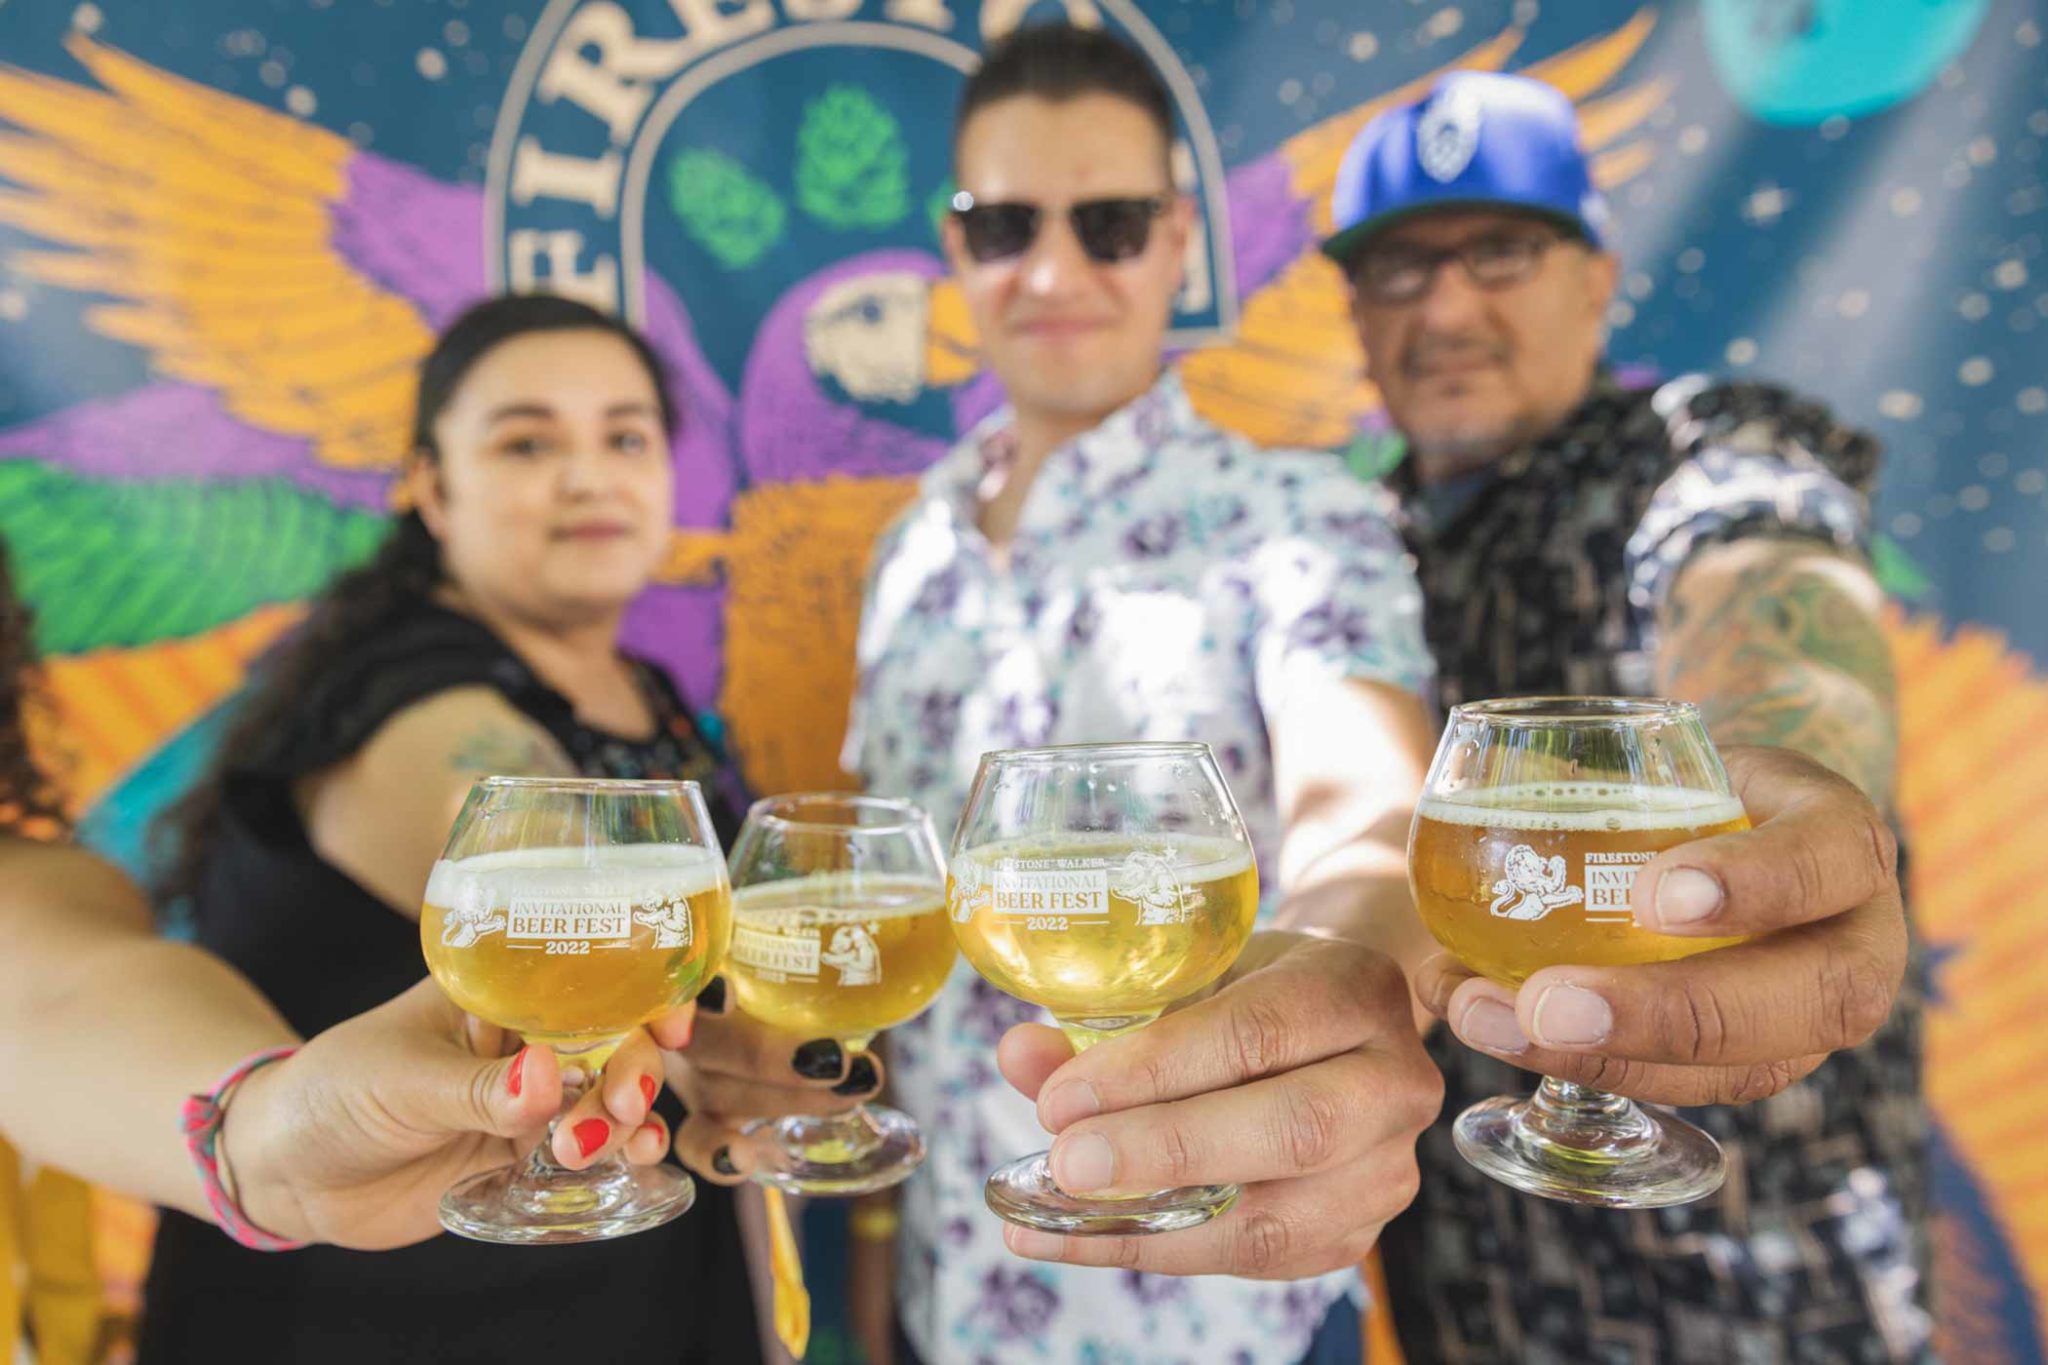 The Firestone Walker Invitational Returns for the First Time in Three